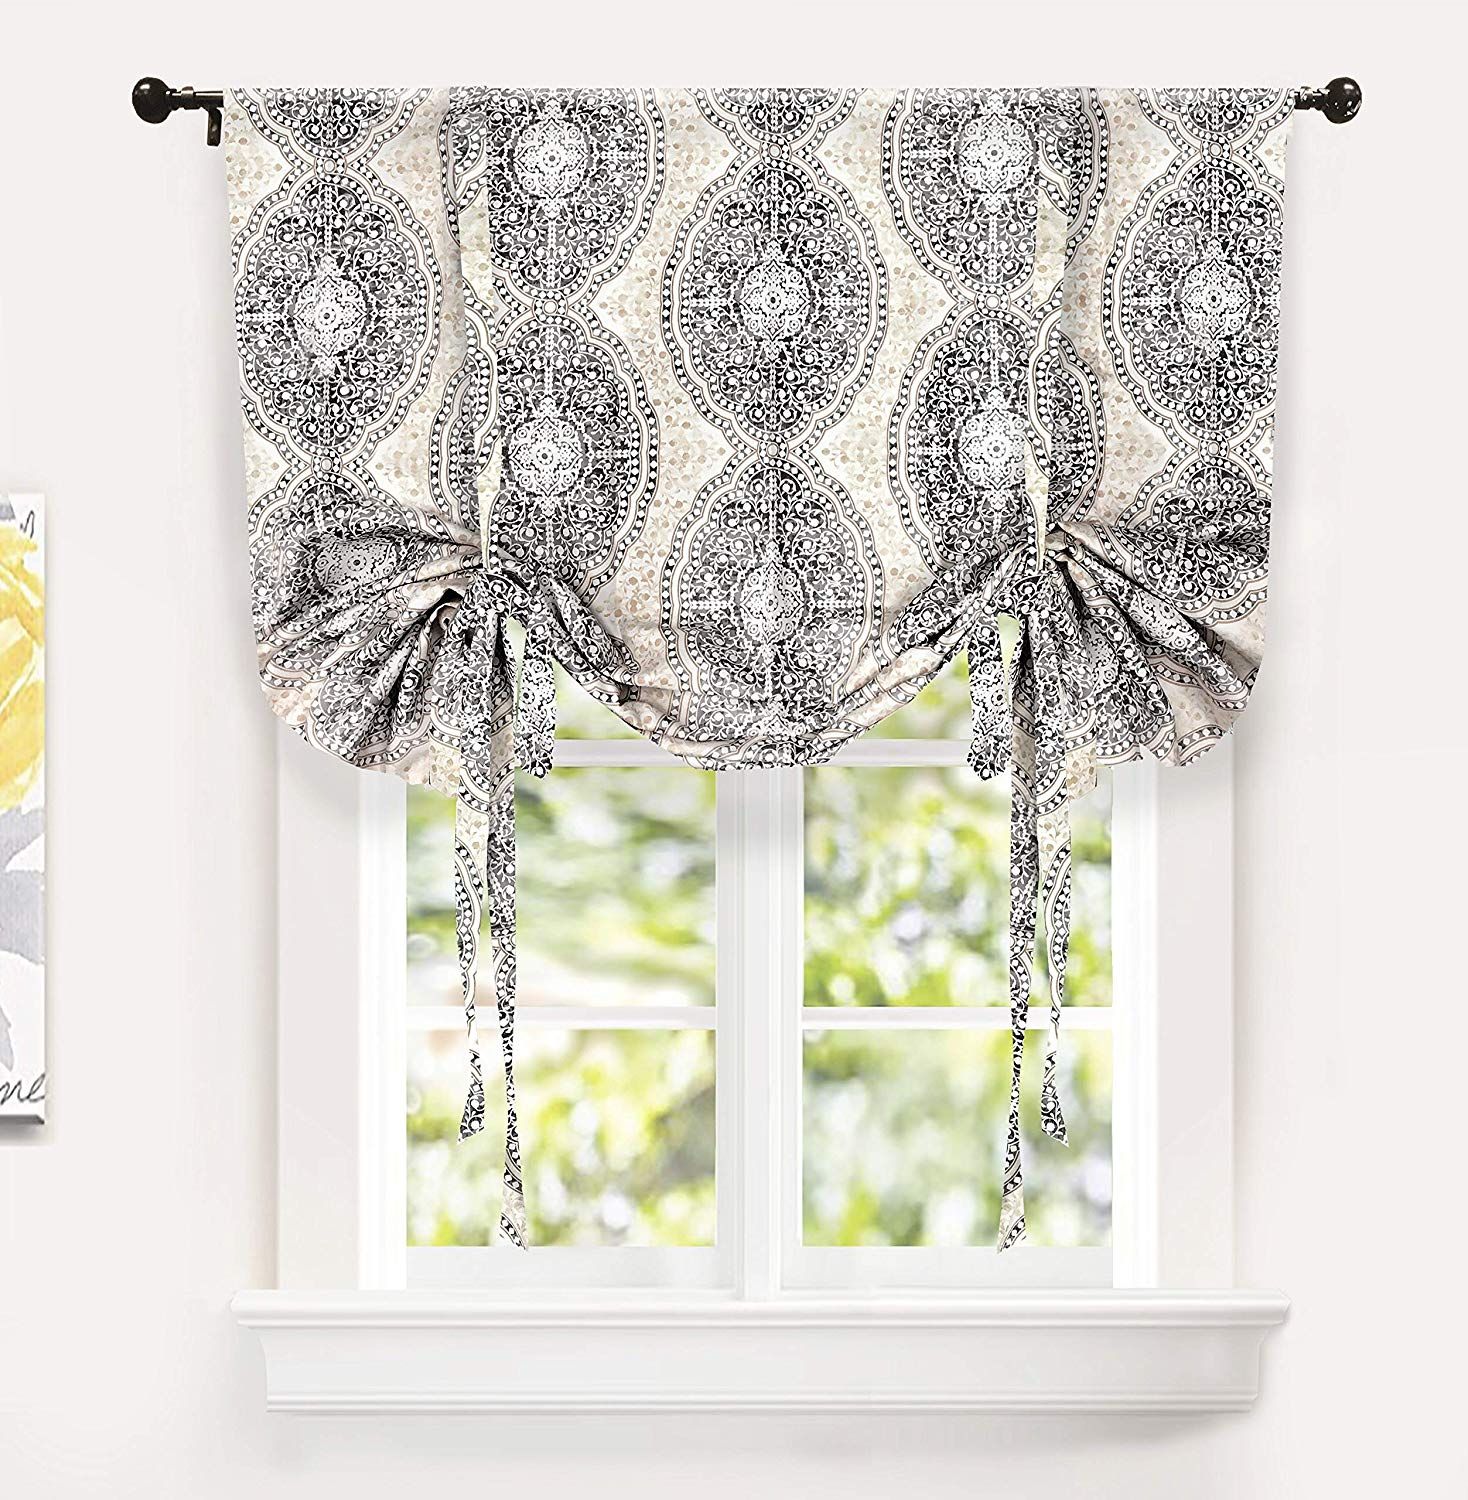 Driftaway Adrianne Damask/floral Pattern Window Curtain Valance 52”x18”,  Yellow/gray Within Floral Pattern Window Valances (View 15 of 20)